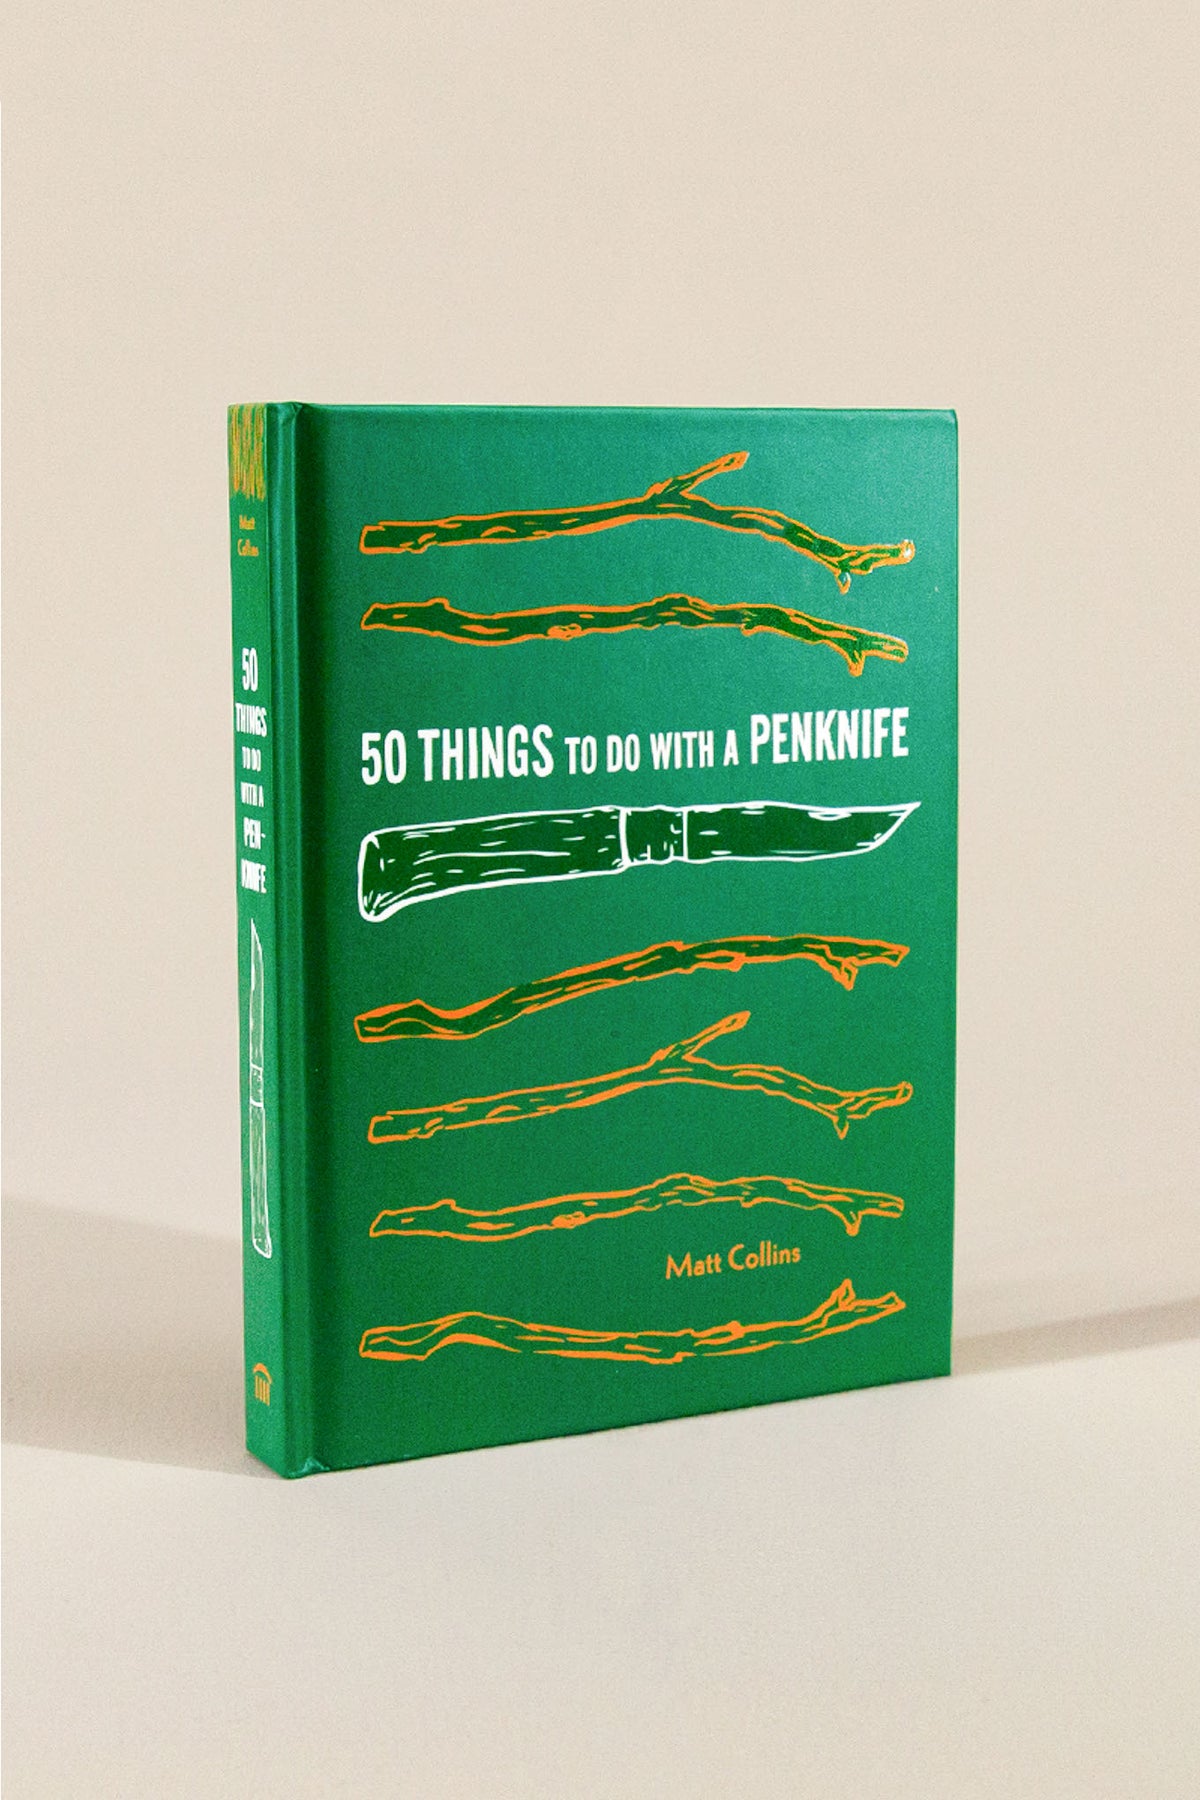 50 things to do with a penknife